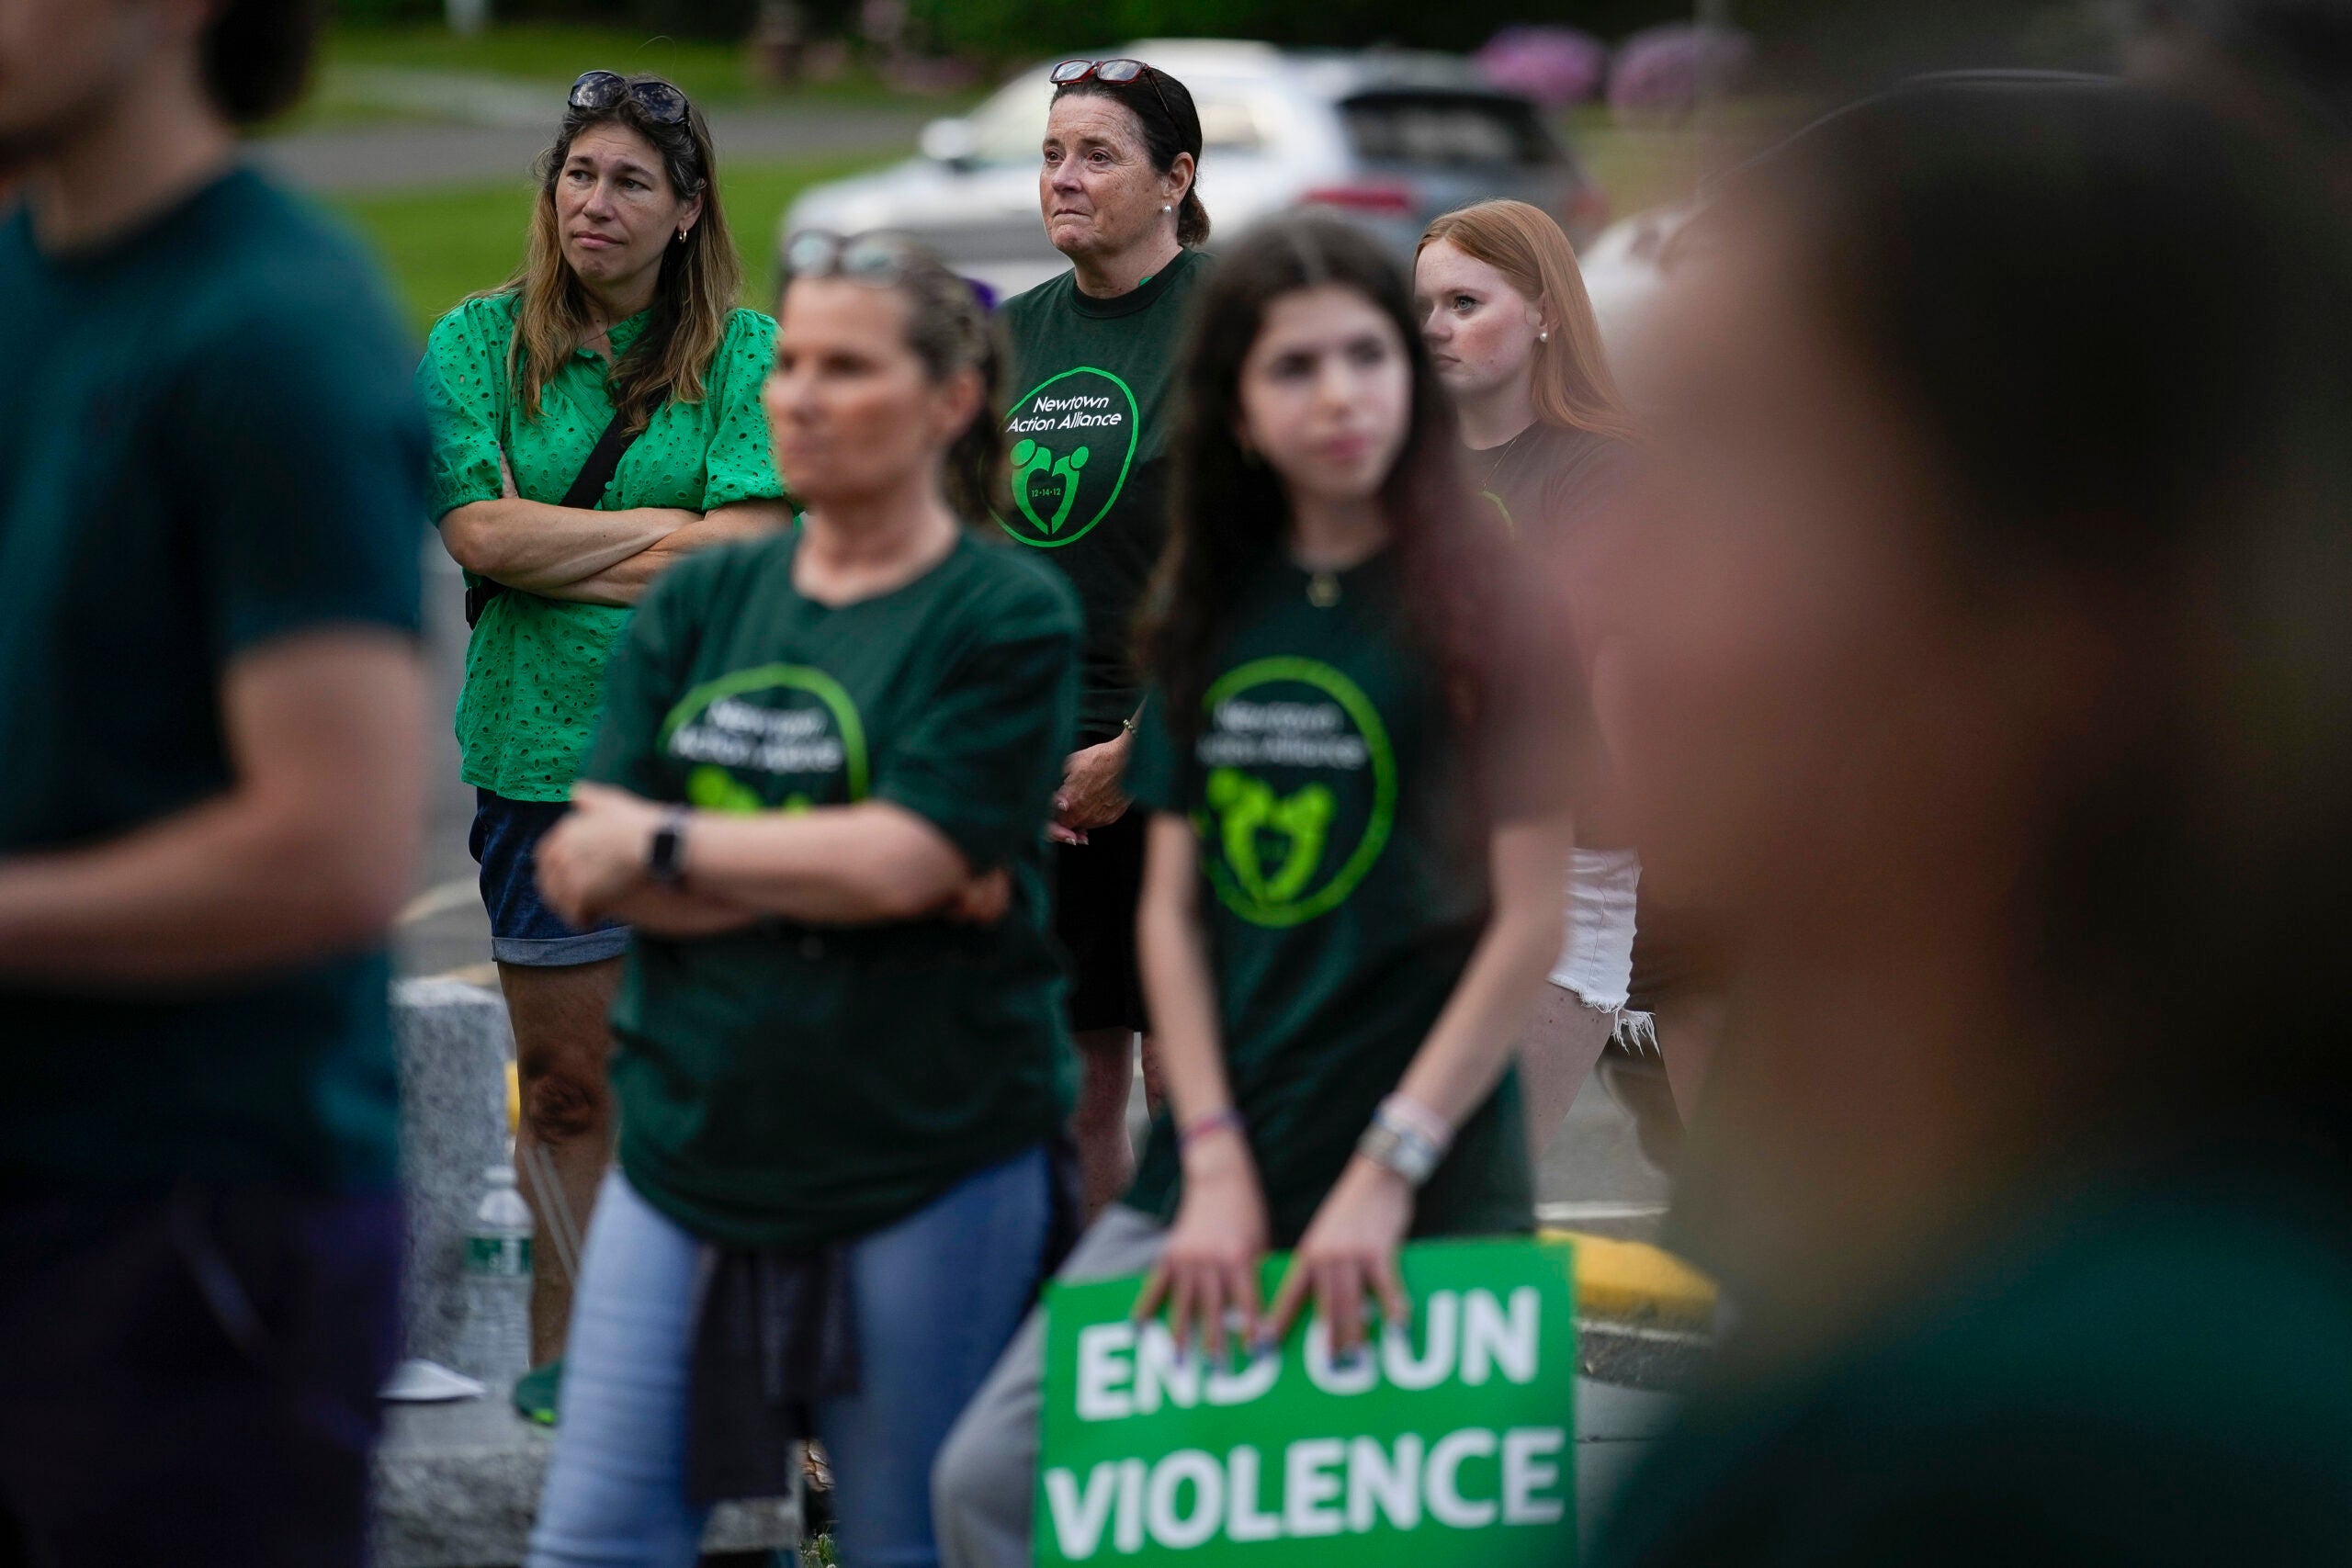 Local residents join survivors of the 2012 Sandy Hook Elementary School shooting for a rally.